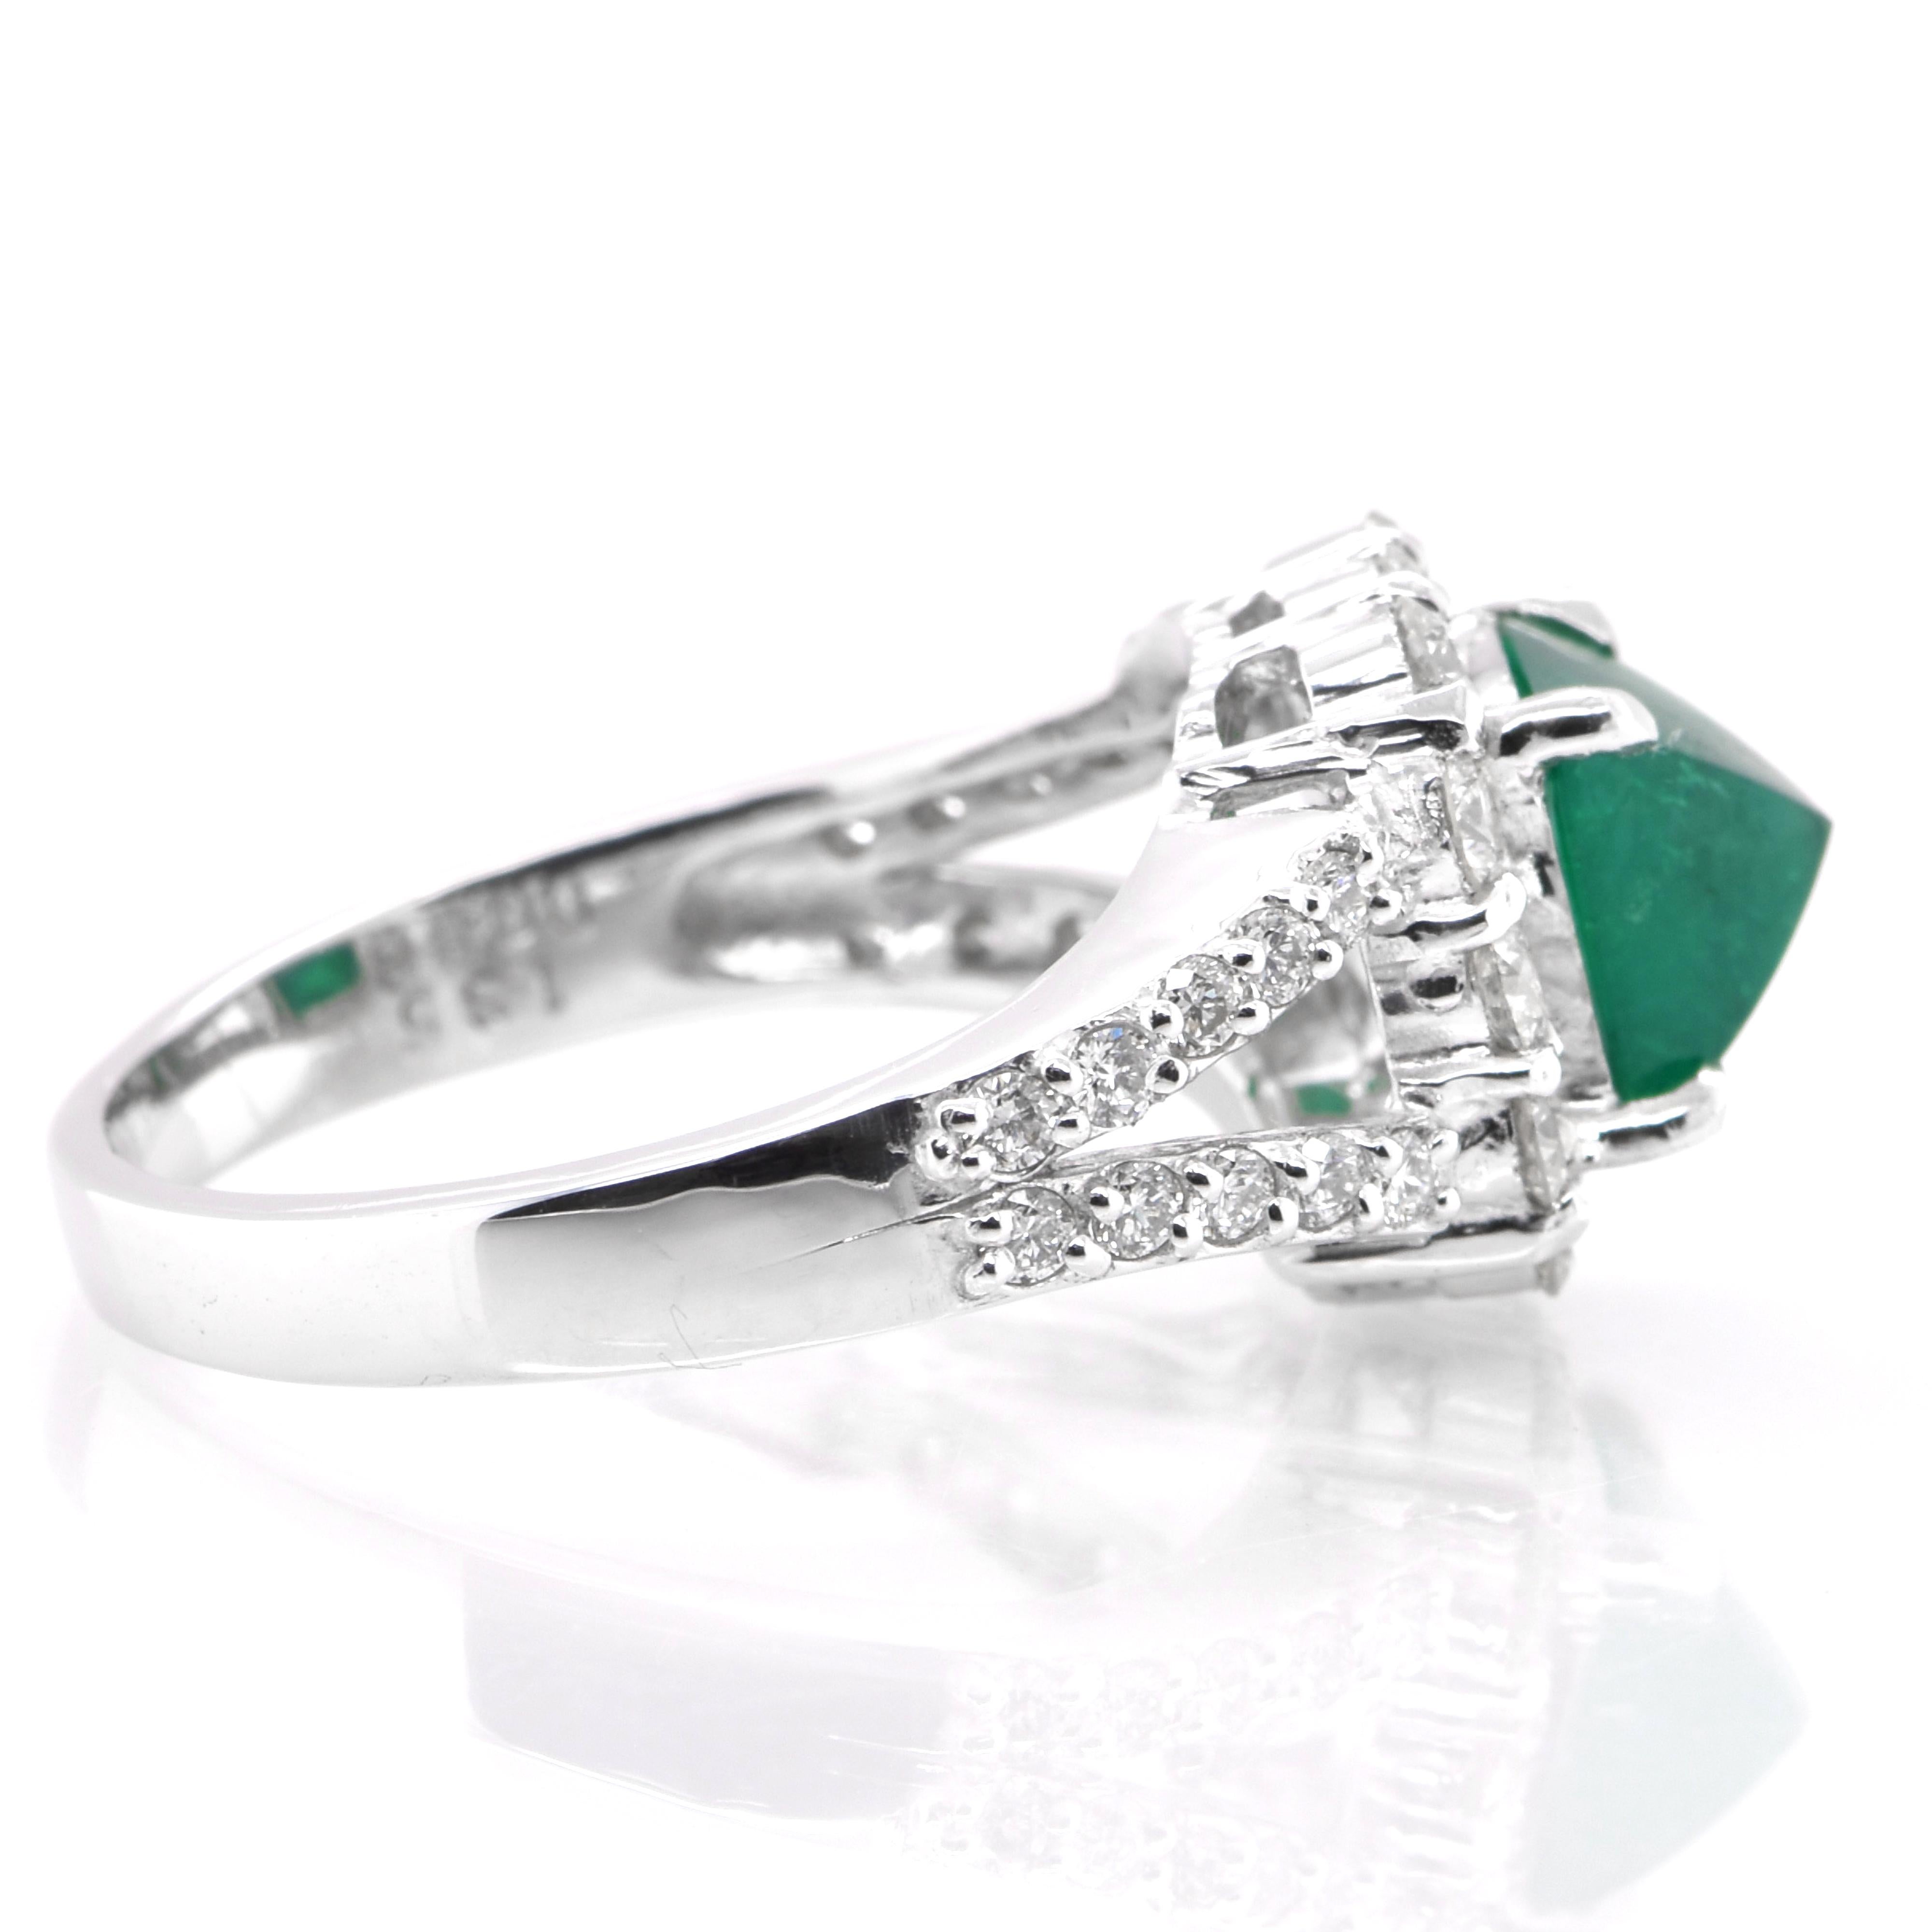 Women's 1.35 Carat Natural Emerald Sugarloaf Cabochon and Diamond Ring Set in Platinum For Sale